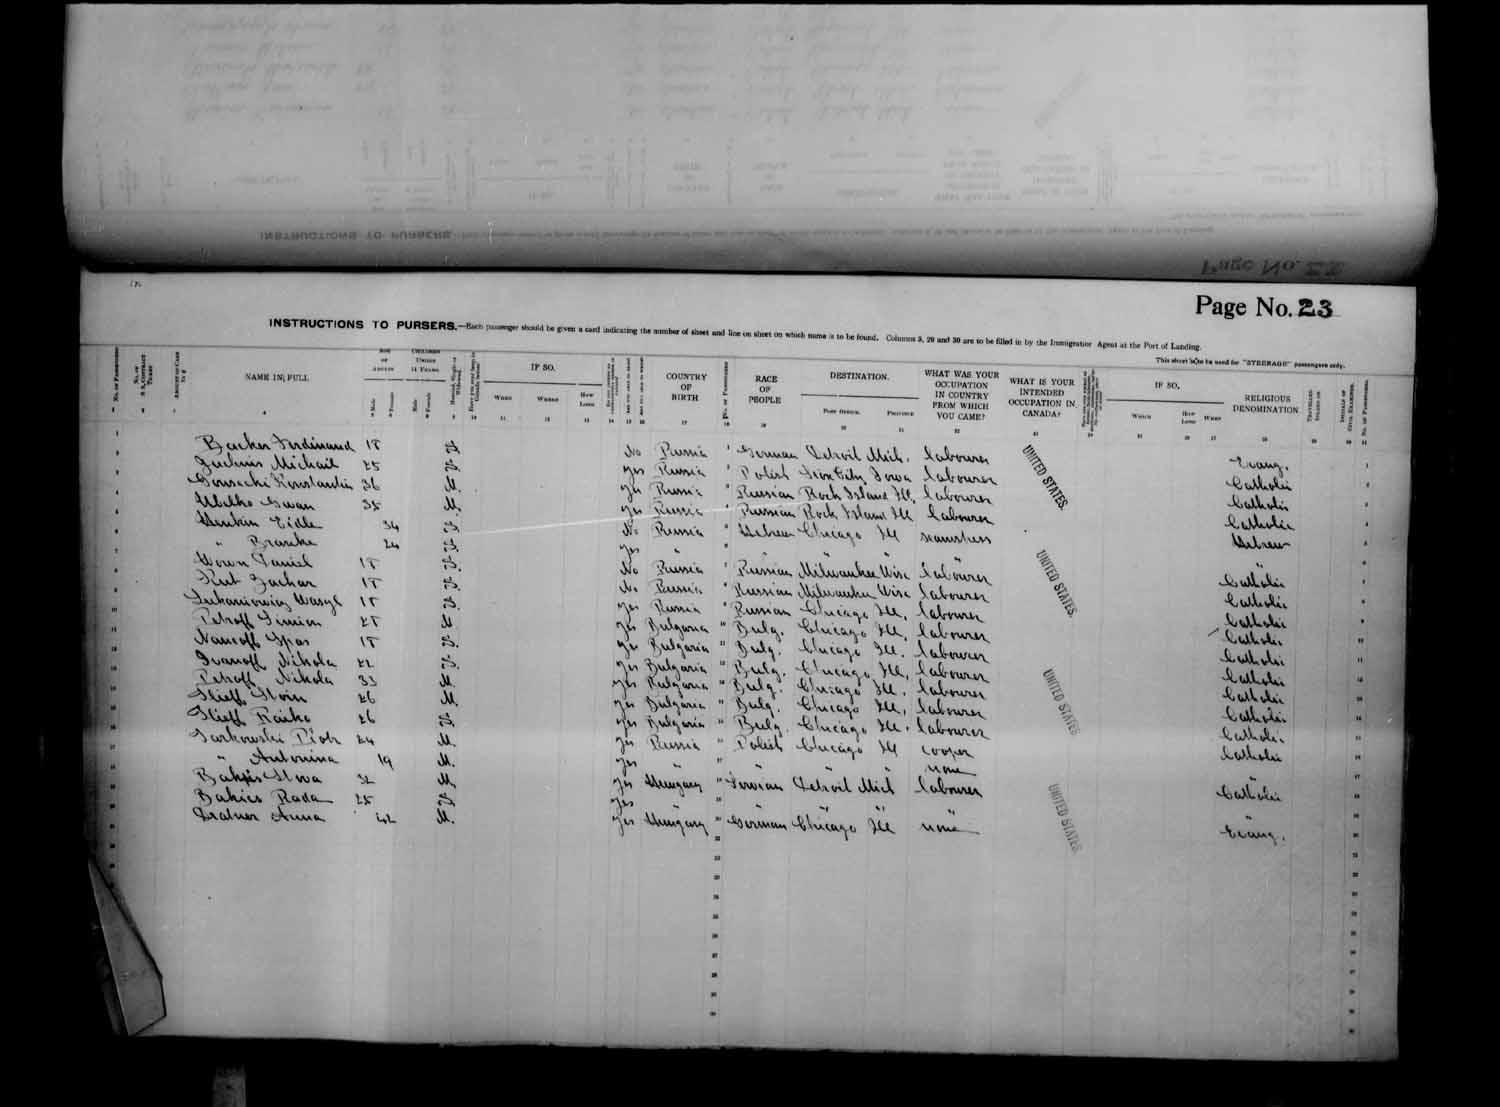 Digitized page of Passenger Lists for Image No.: e003686931